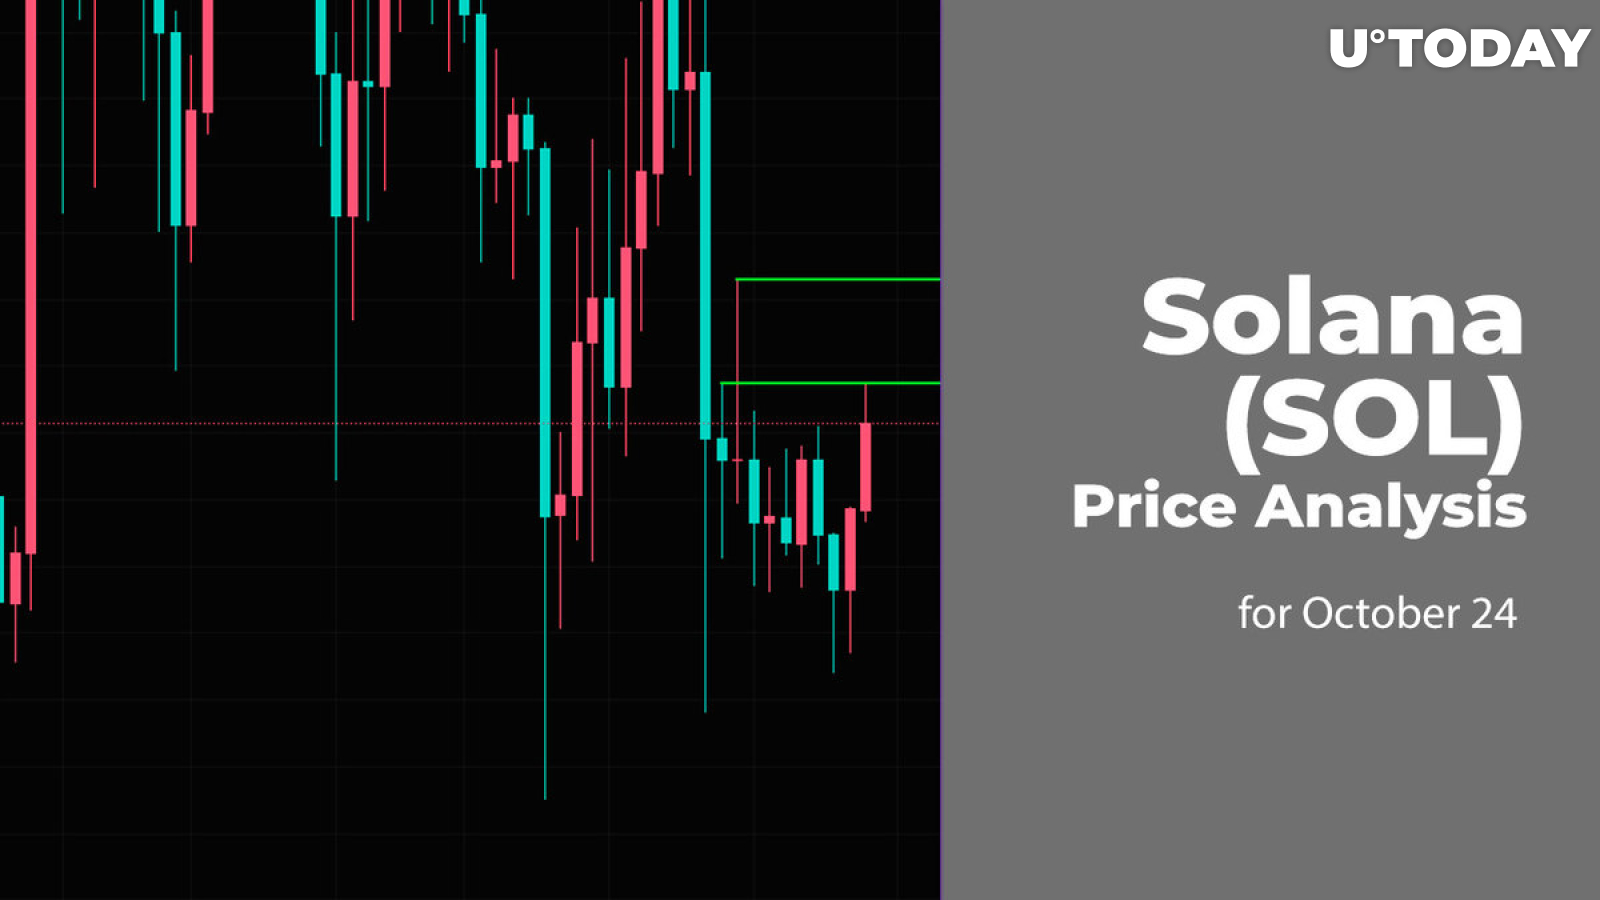 Solana (SOL) Price Analysis for October 24